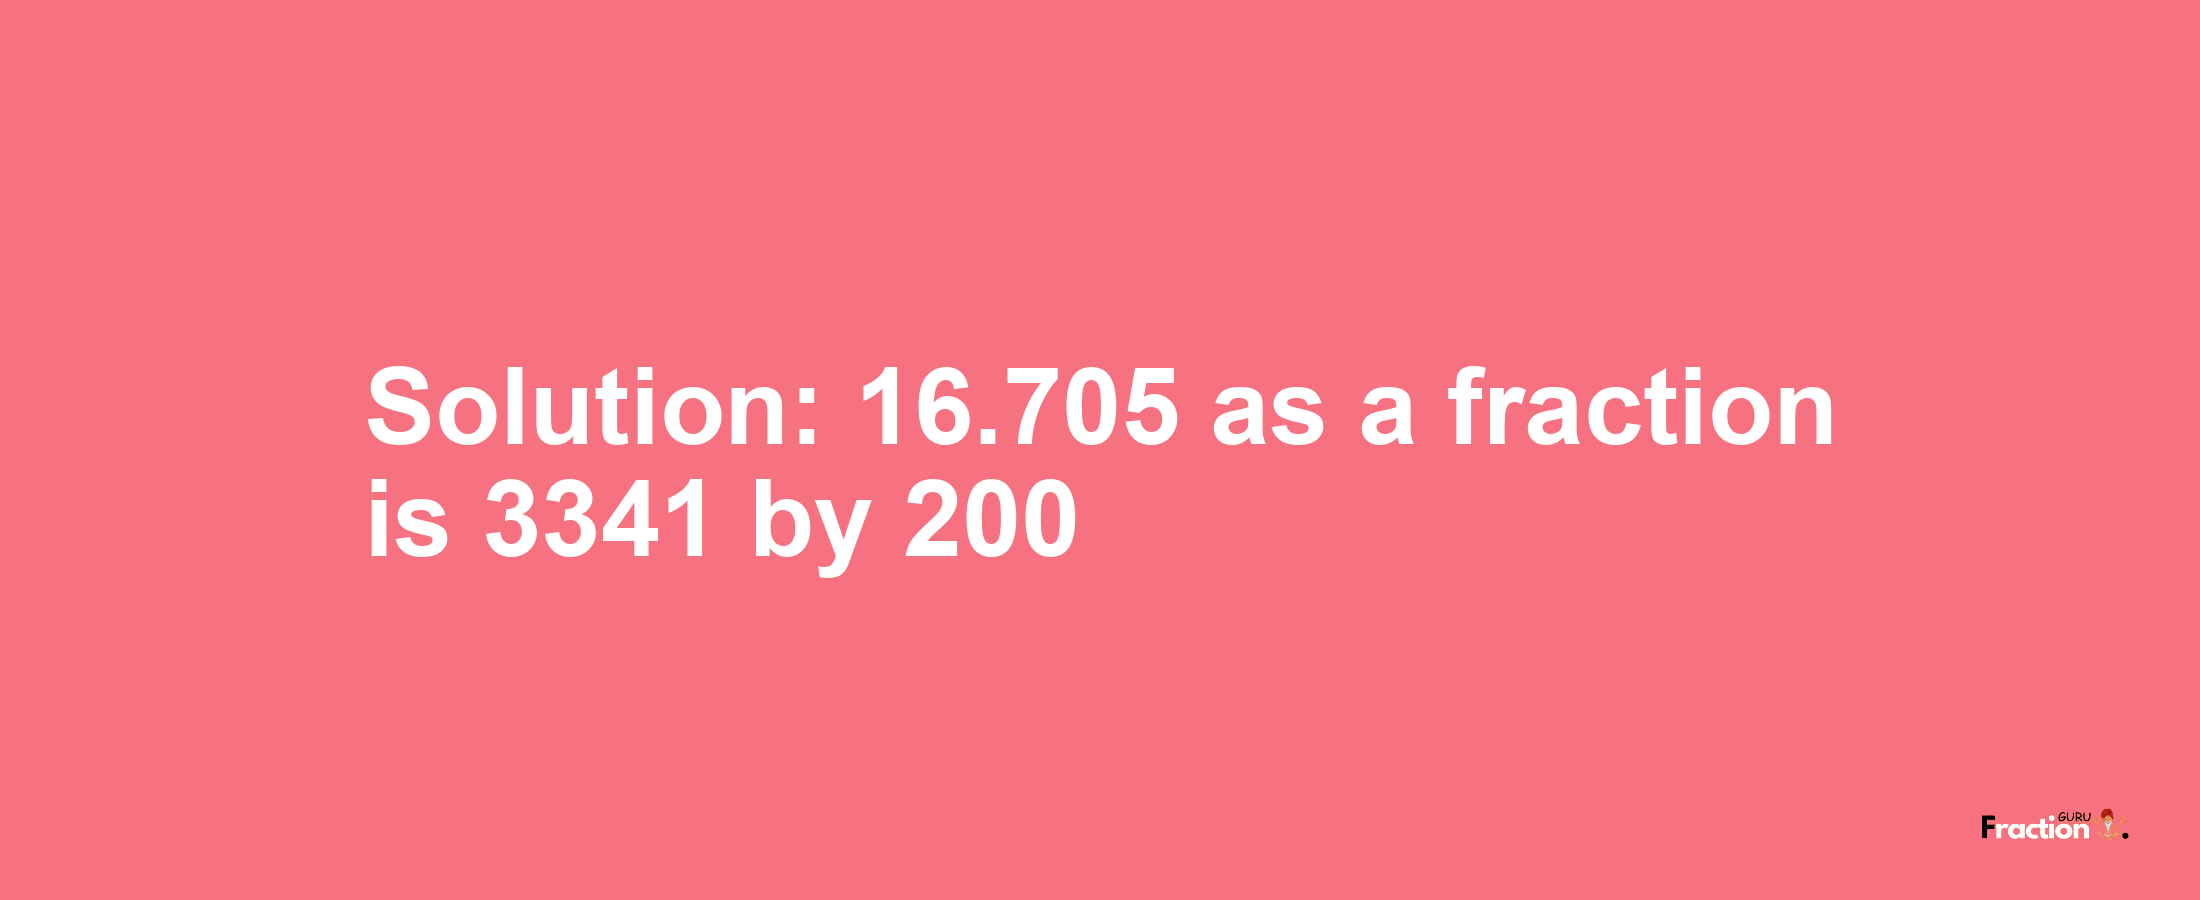 Solution:16.705 as a fraction is 3341/200